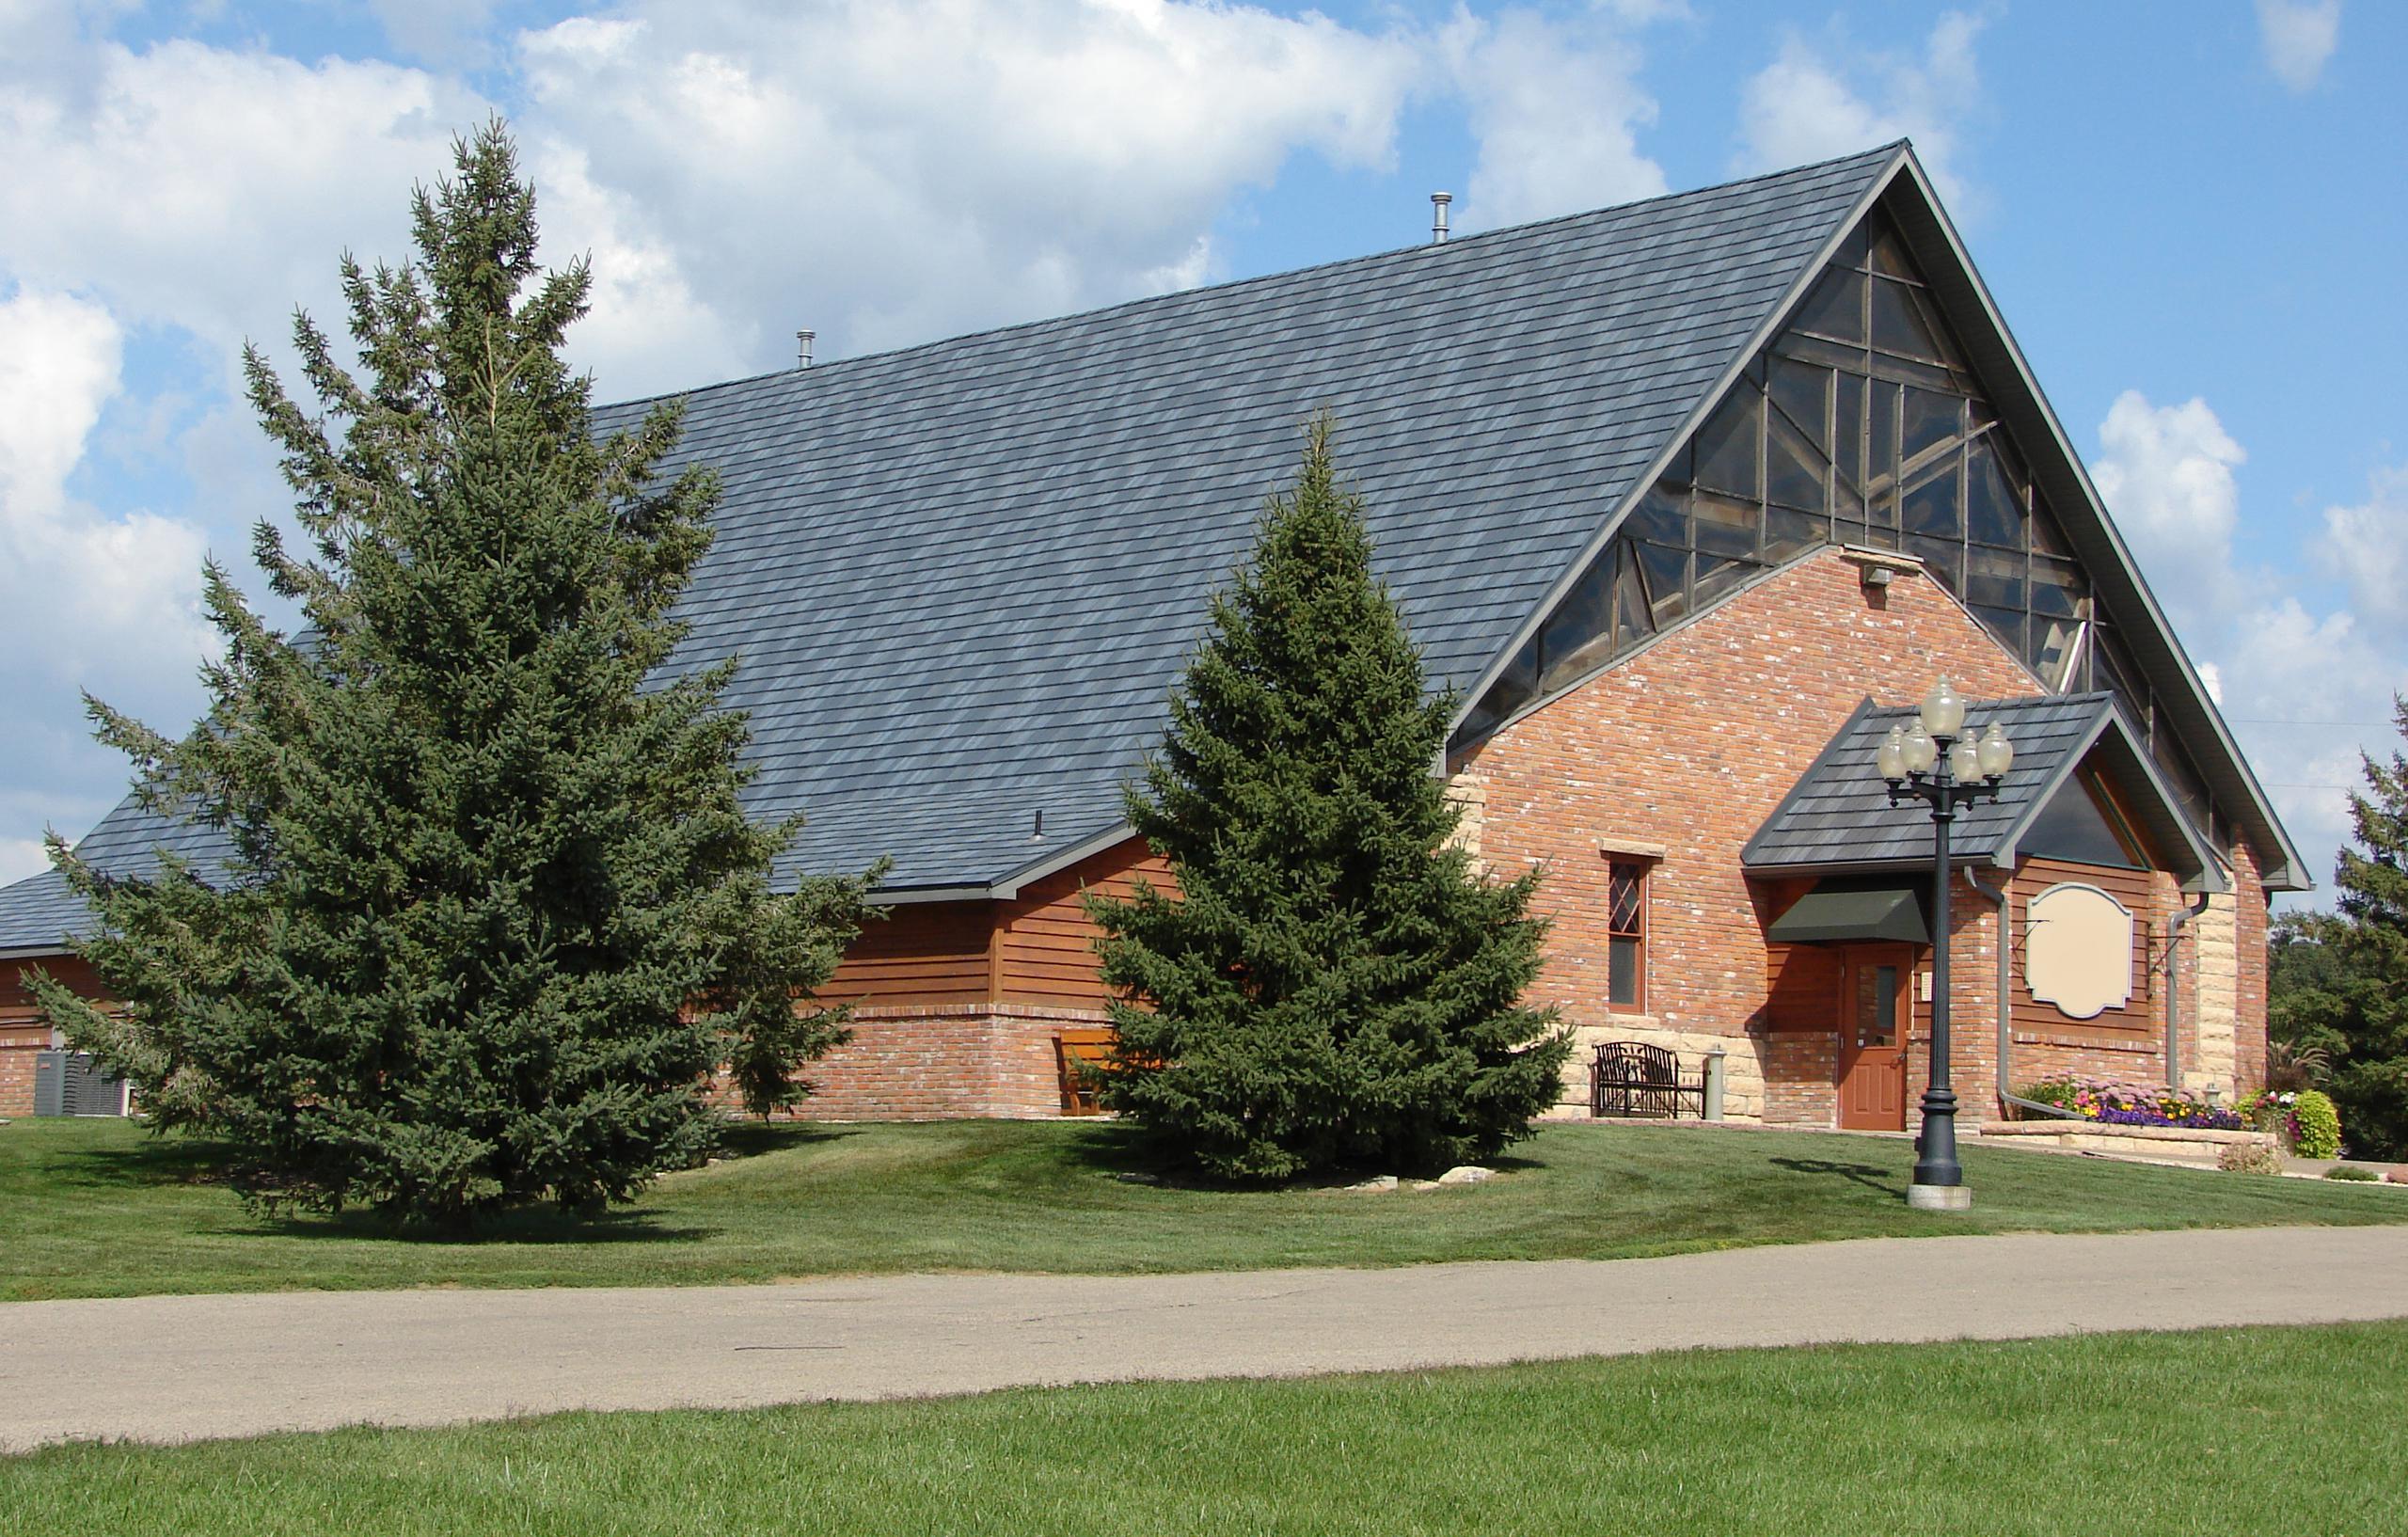 Architectural appeal was added to this charming church building when the EDCO Arrowline Slate Stone Blend Roofing was installed.